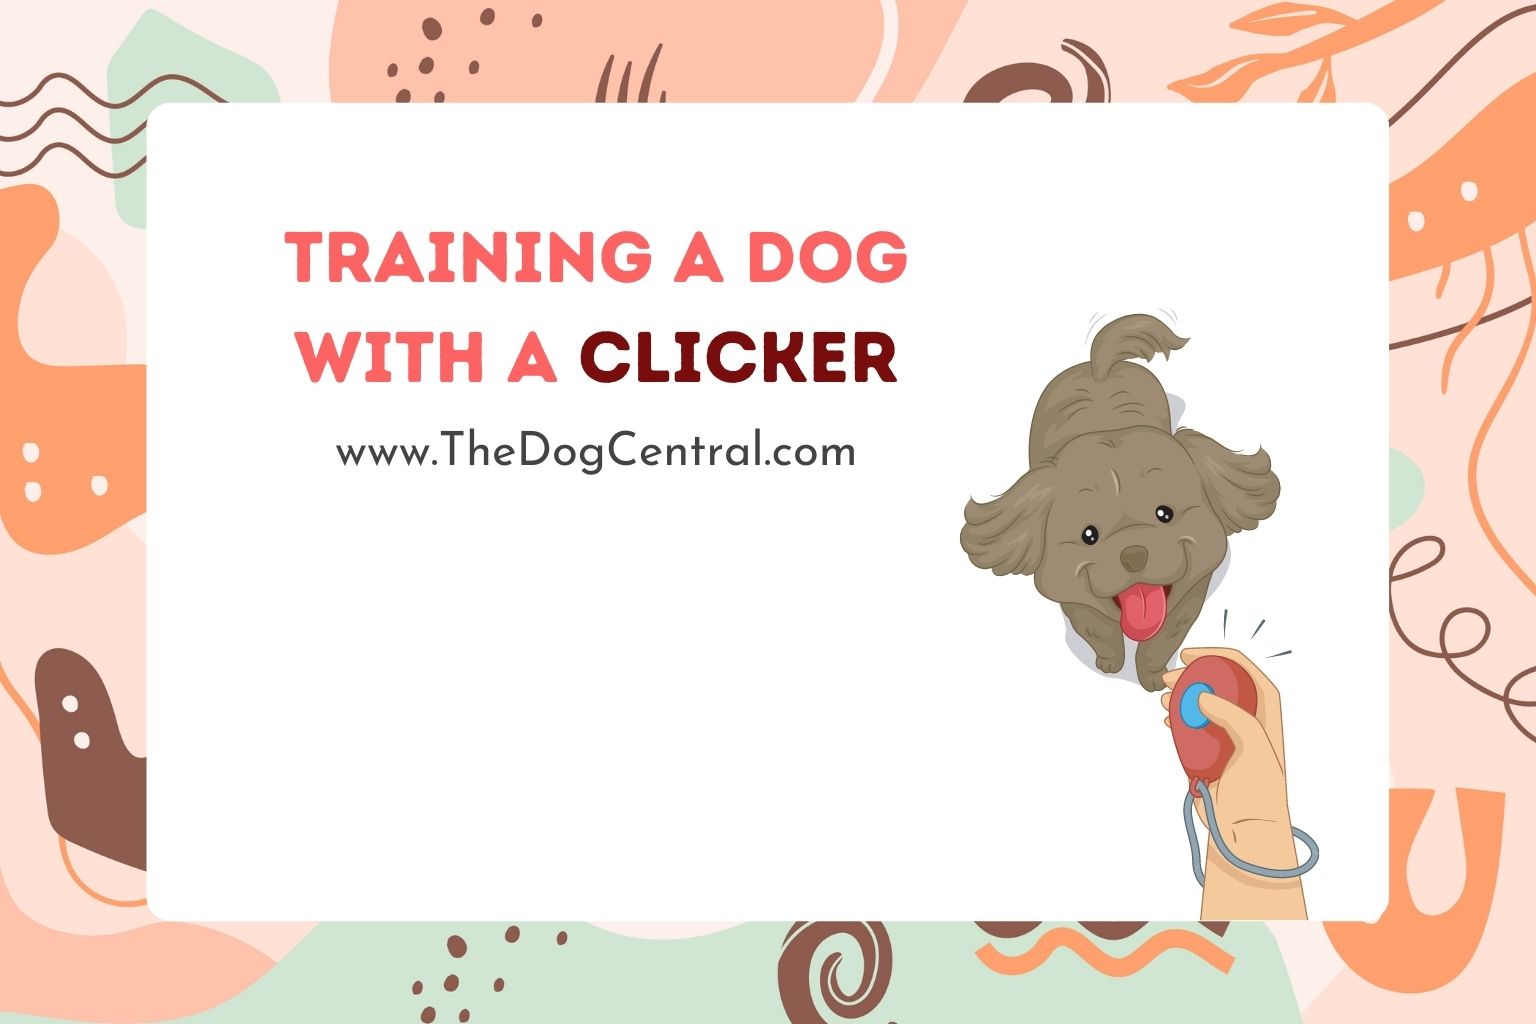 Training a Dog With a Clicker